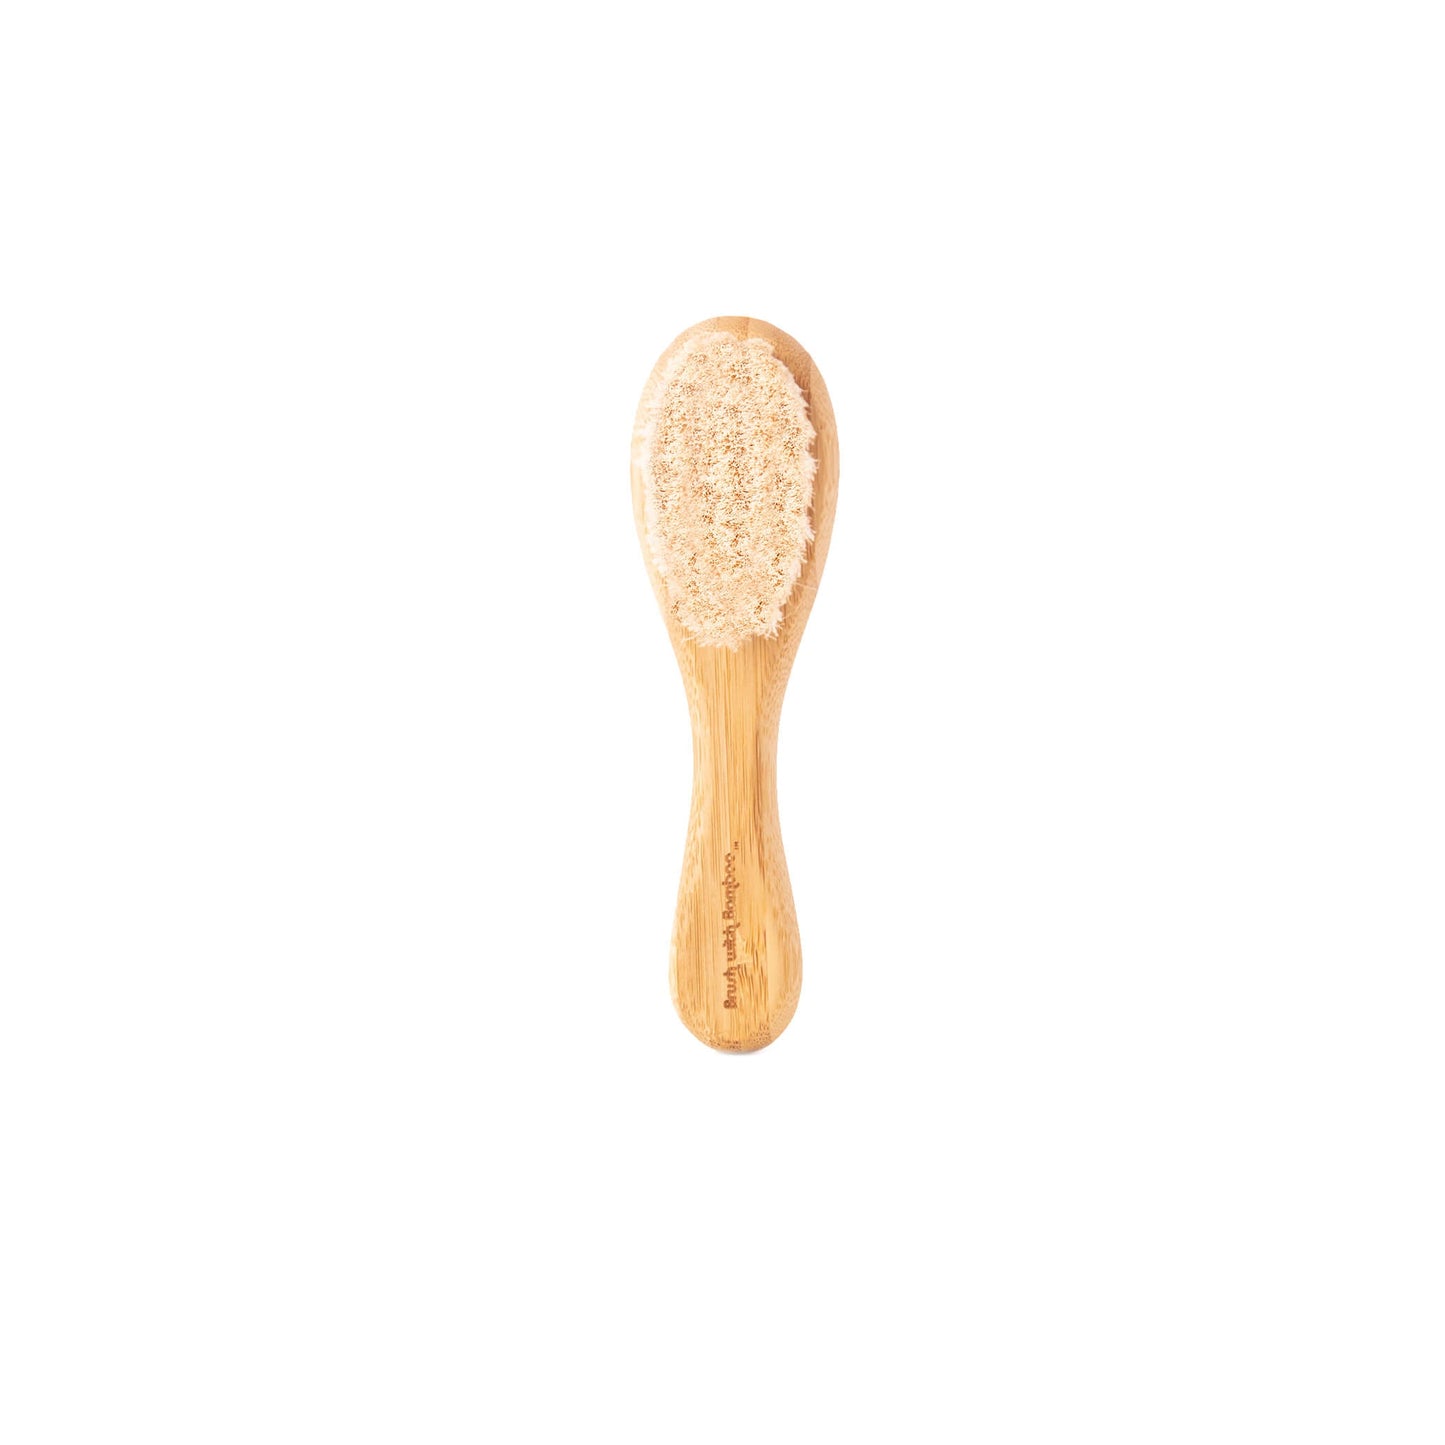 Hairbrush for babies and toddlers with natural soft goat hair bristles.